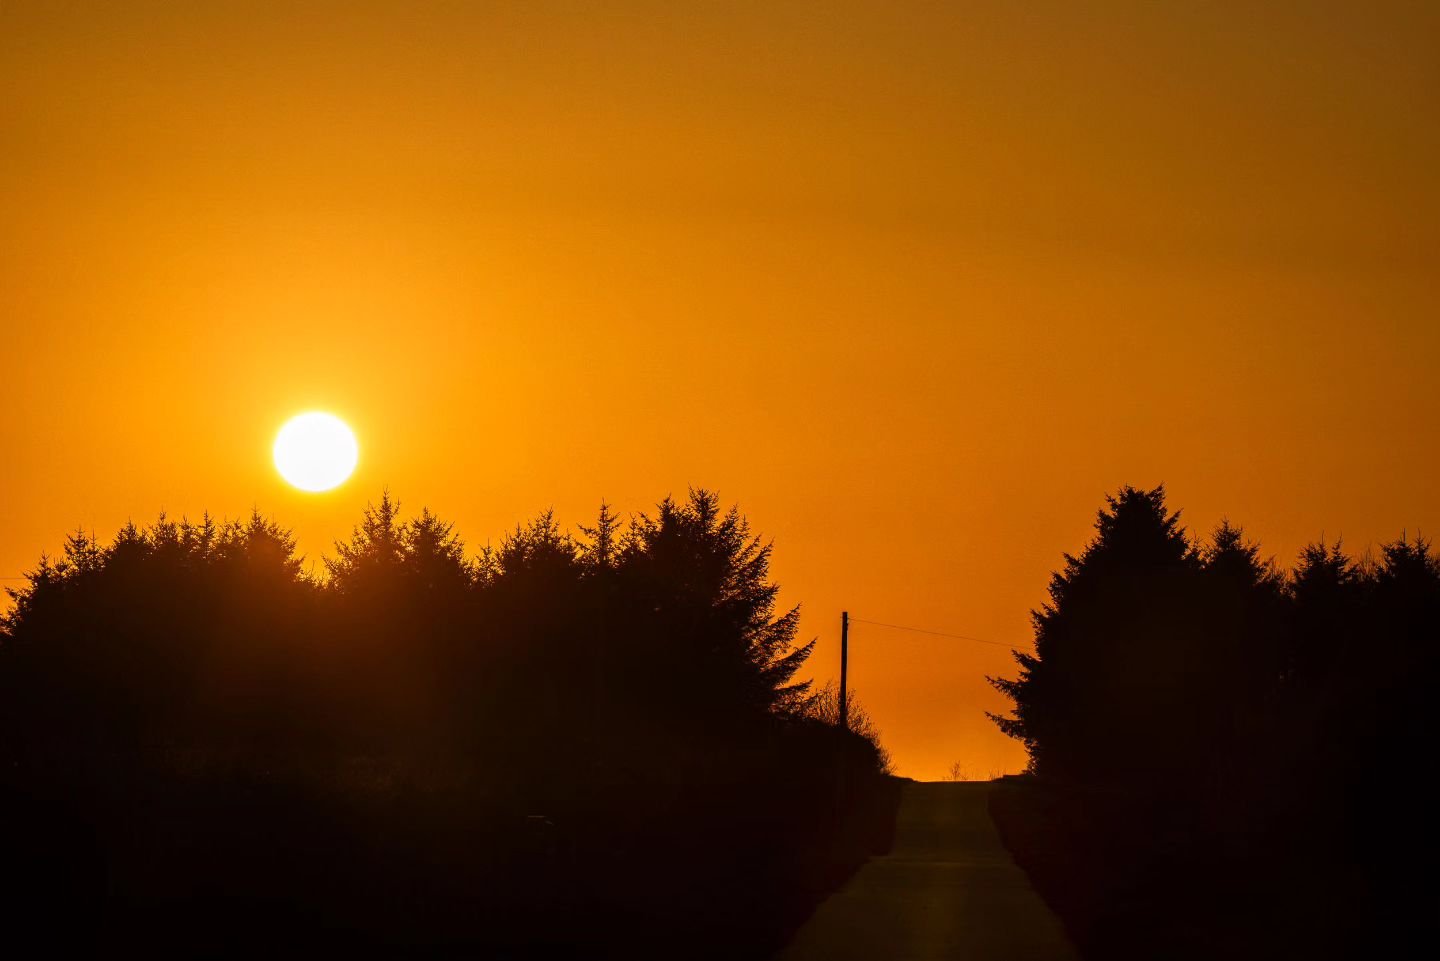 Road to Sunset Beyond. Caithness.

#sunset #fineartphotography #cinematic #landscapephotographer #artphotography #silhouette_creative #caithness #sunsetphotography